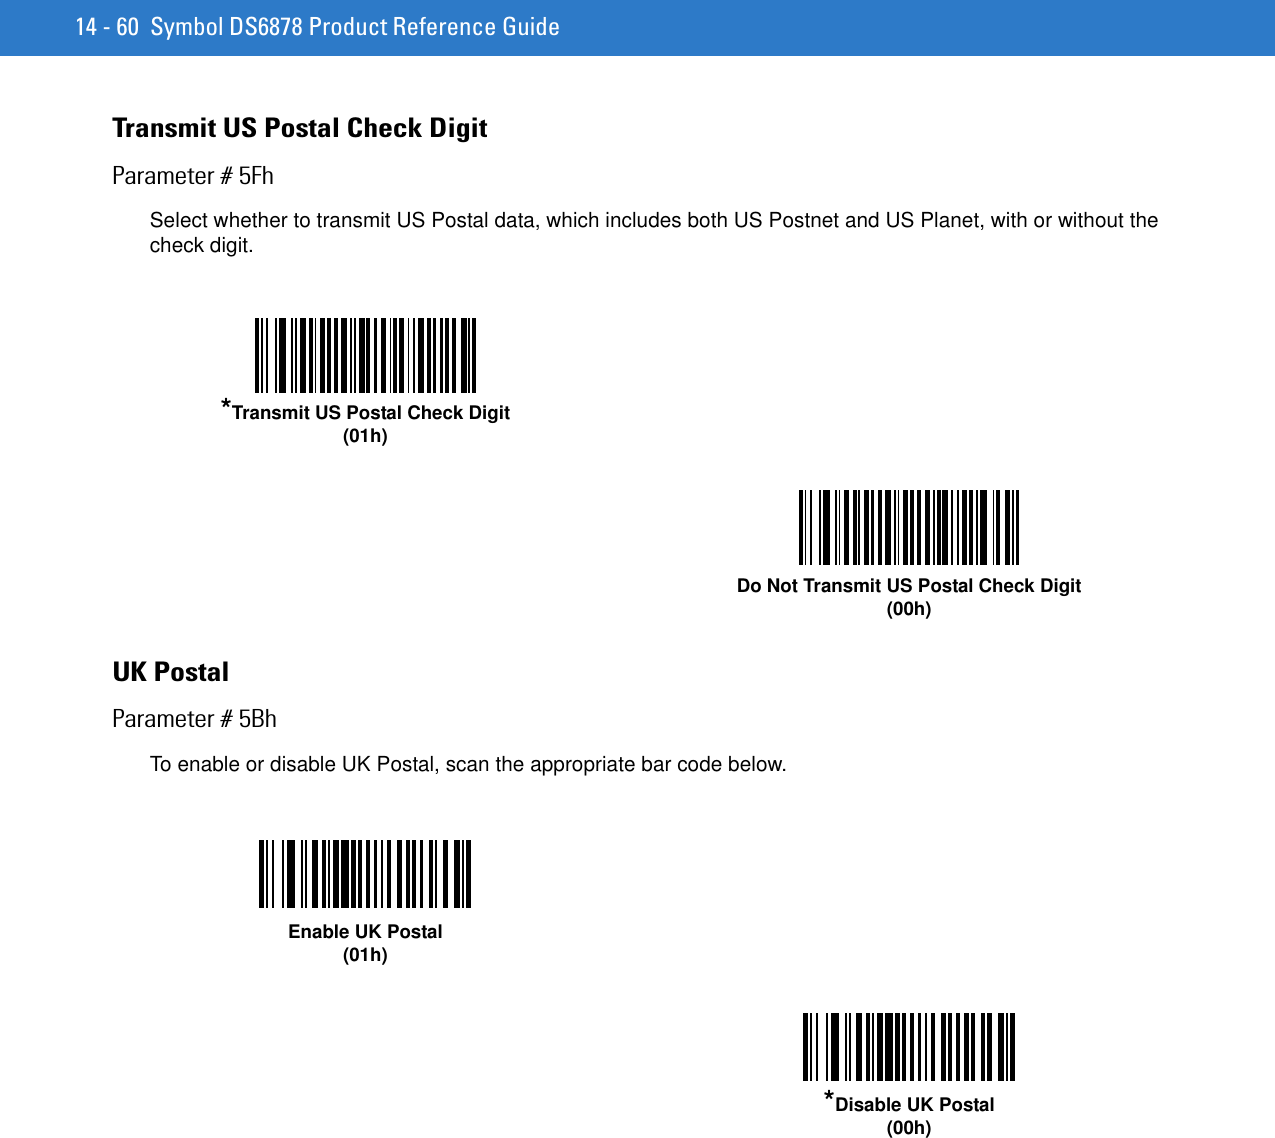 14 - 60 Symbol DS6878 Product Reference GuideTransmit US Postal Check DigitParameter # 5FhSelect whether to transmit US Postal data, which includes both US Postnet and US Planet, with or without the check digit.UK PostalParameter # 5BhTo enable or disable UK Postal, scan the appropriate bar code below.*Transmit US Postal Check Digit(01h)Do Not Transmit US Postal Check Digit(00h)Enable UK Postal(01h)*Disable UK Postal(00h)